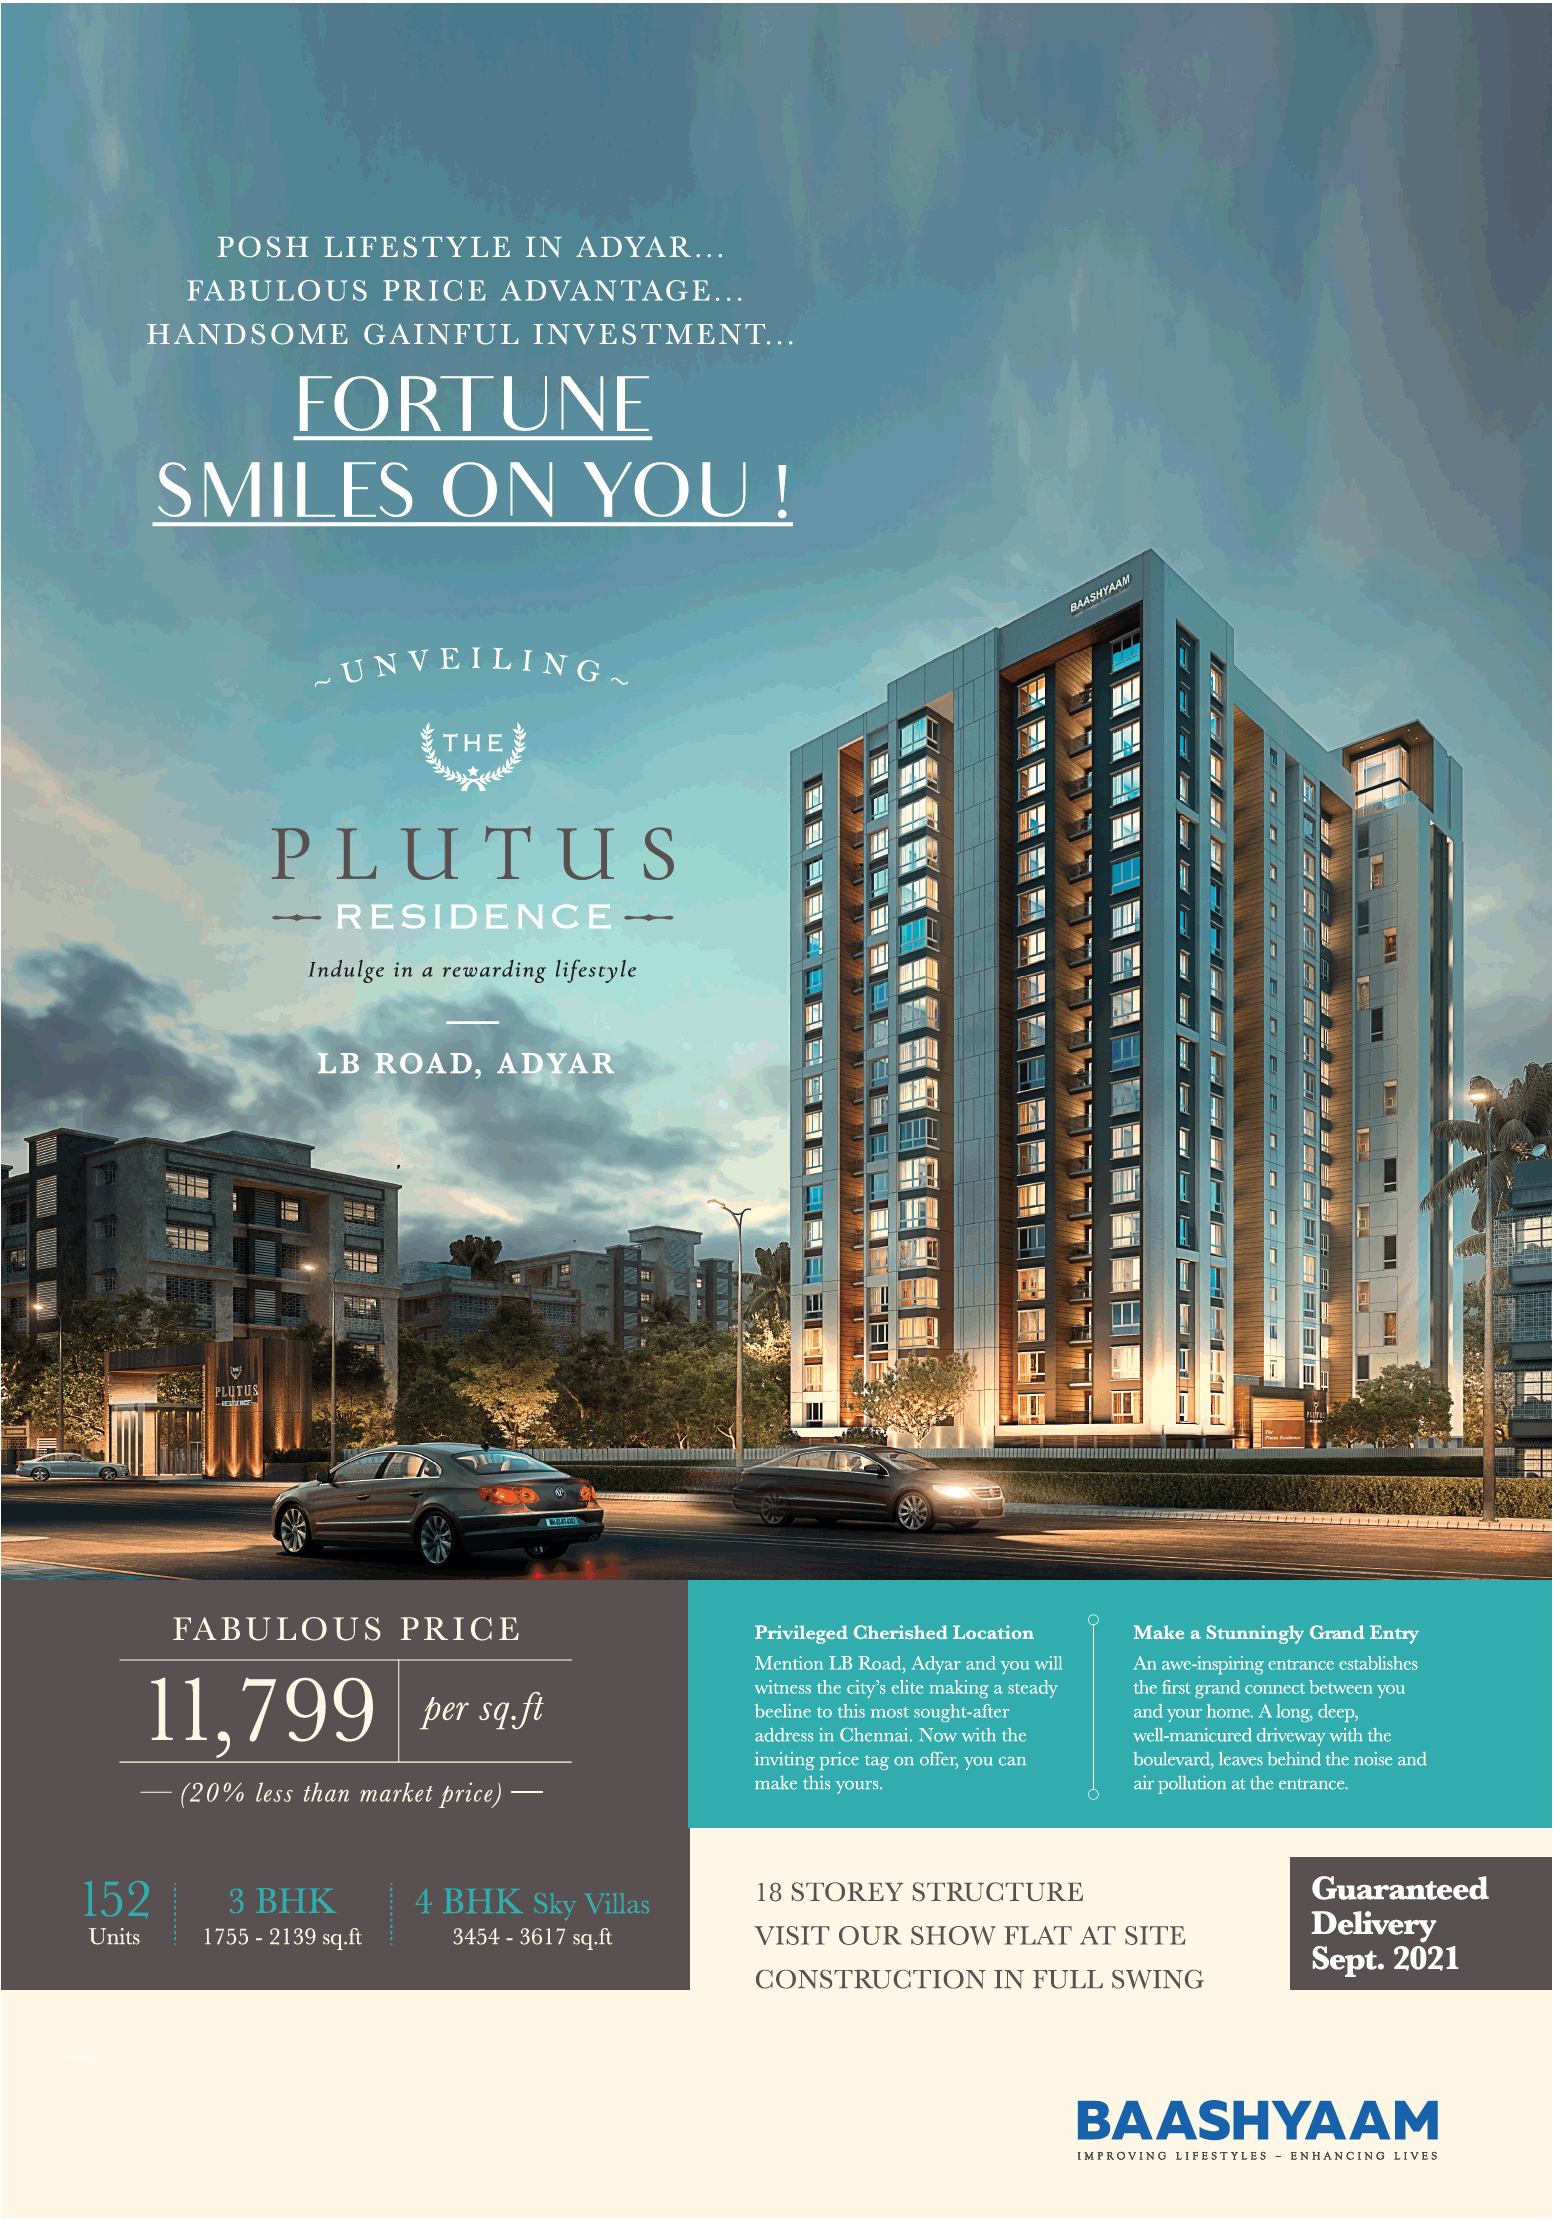 Guaranteed delivery Sept 2021 at Baashyaam Plutus Residence in Chennai